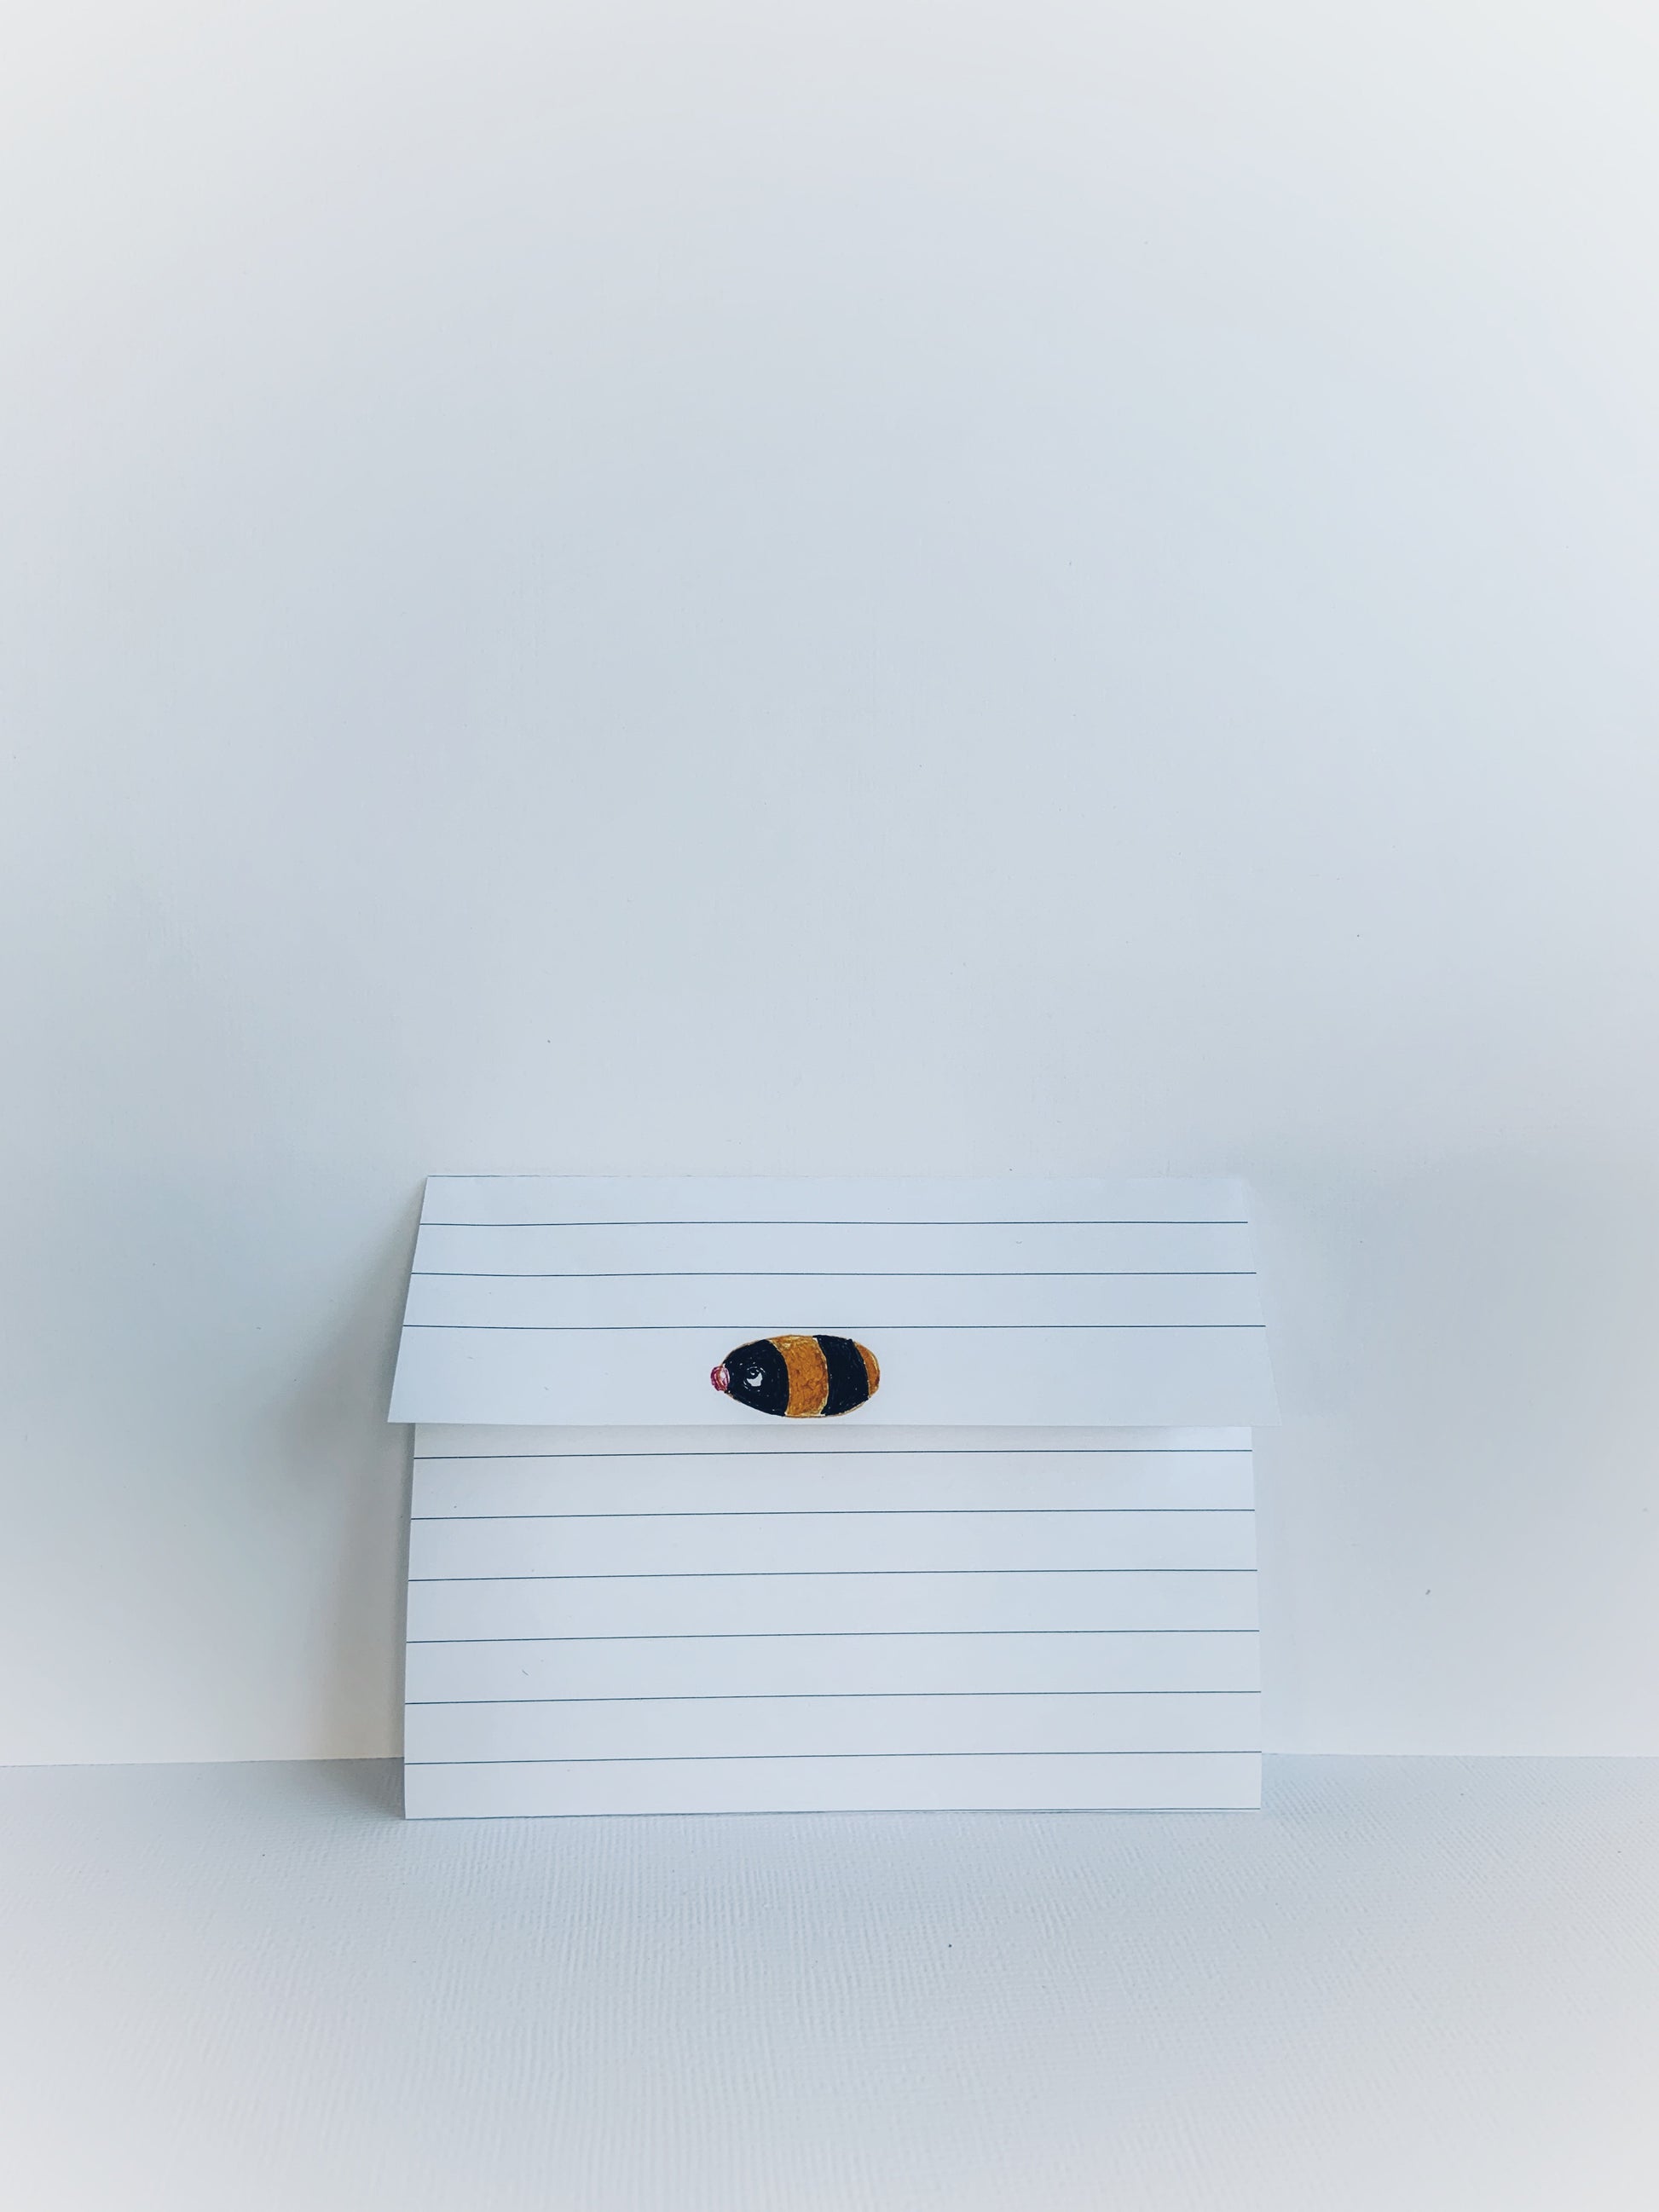 Folded lined notepaper with a little bee painted on the front.